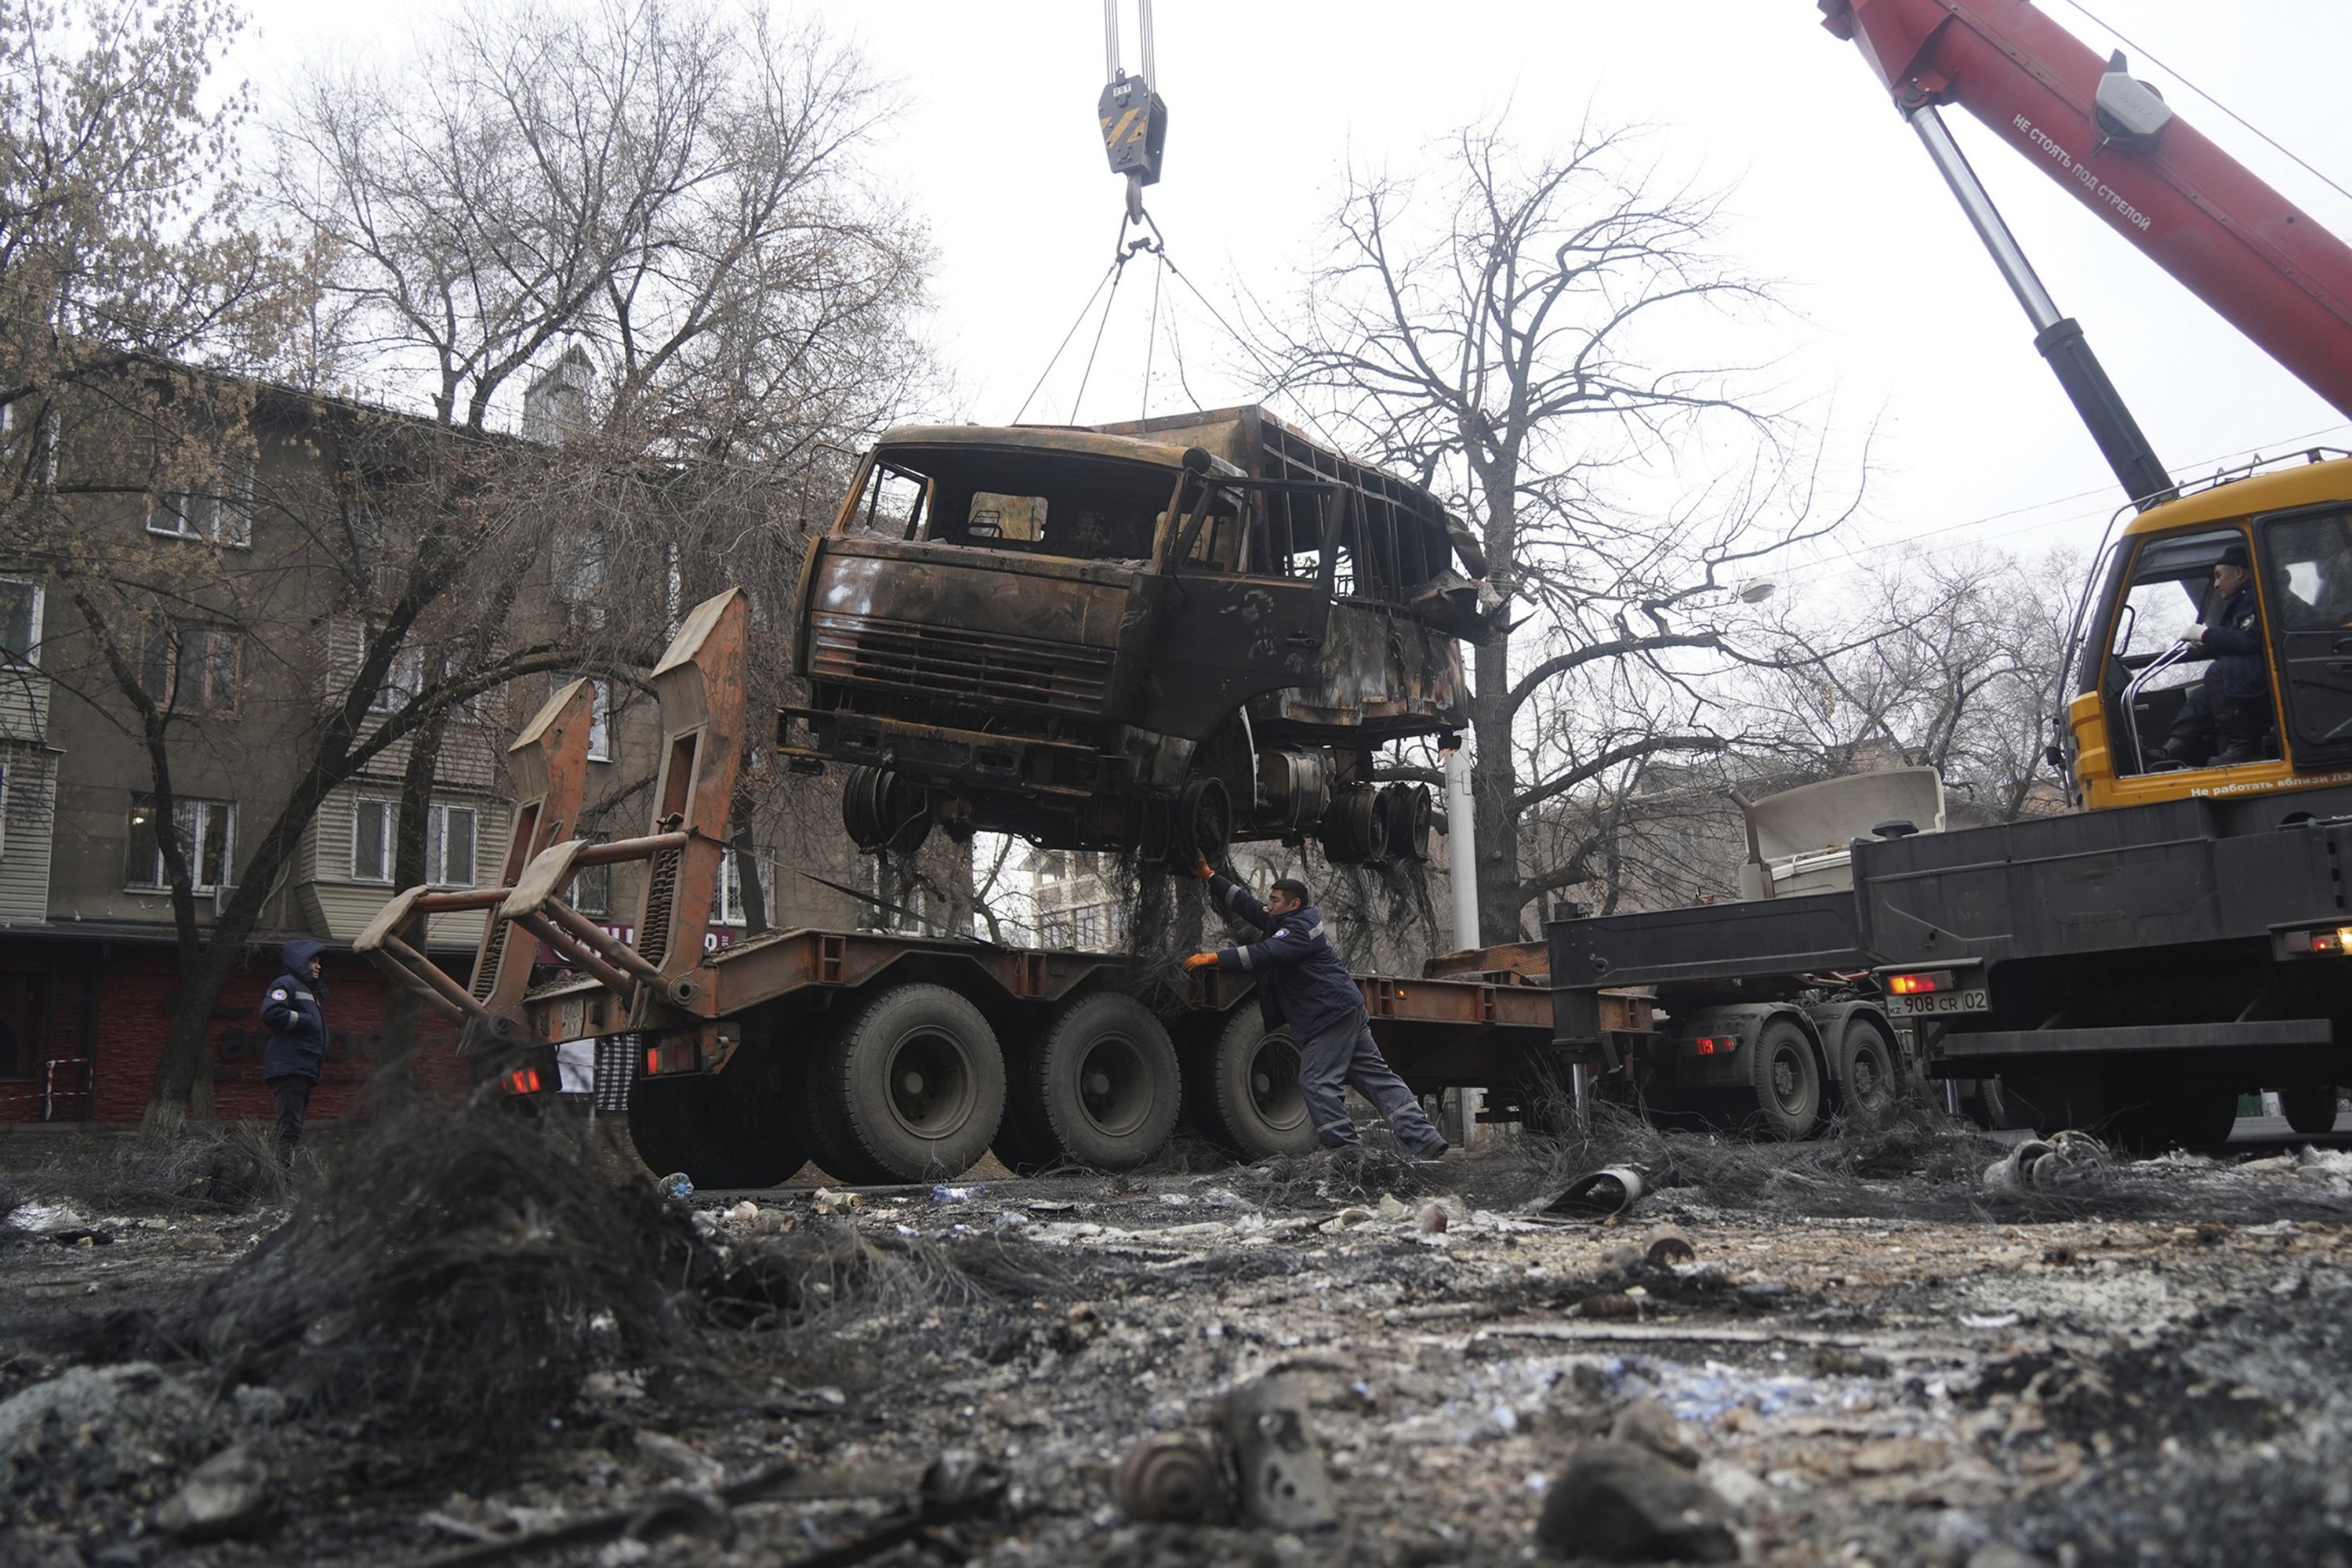 A crane loads a military truck, which was burned during clashes onto the platform in Almaty, Kazakhstan, Jan. 9, 2022. (AP Photo)